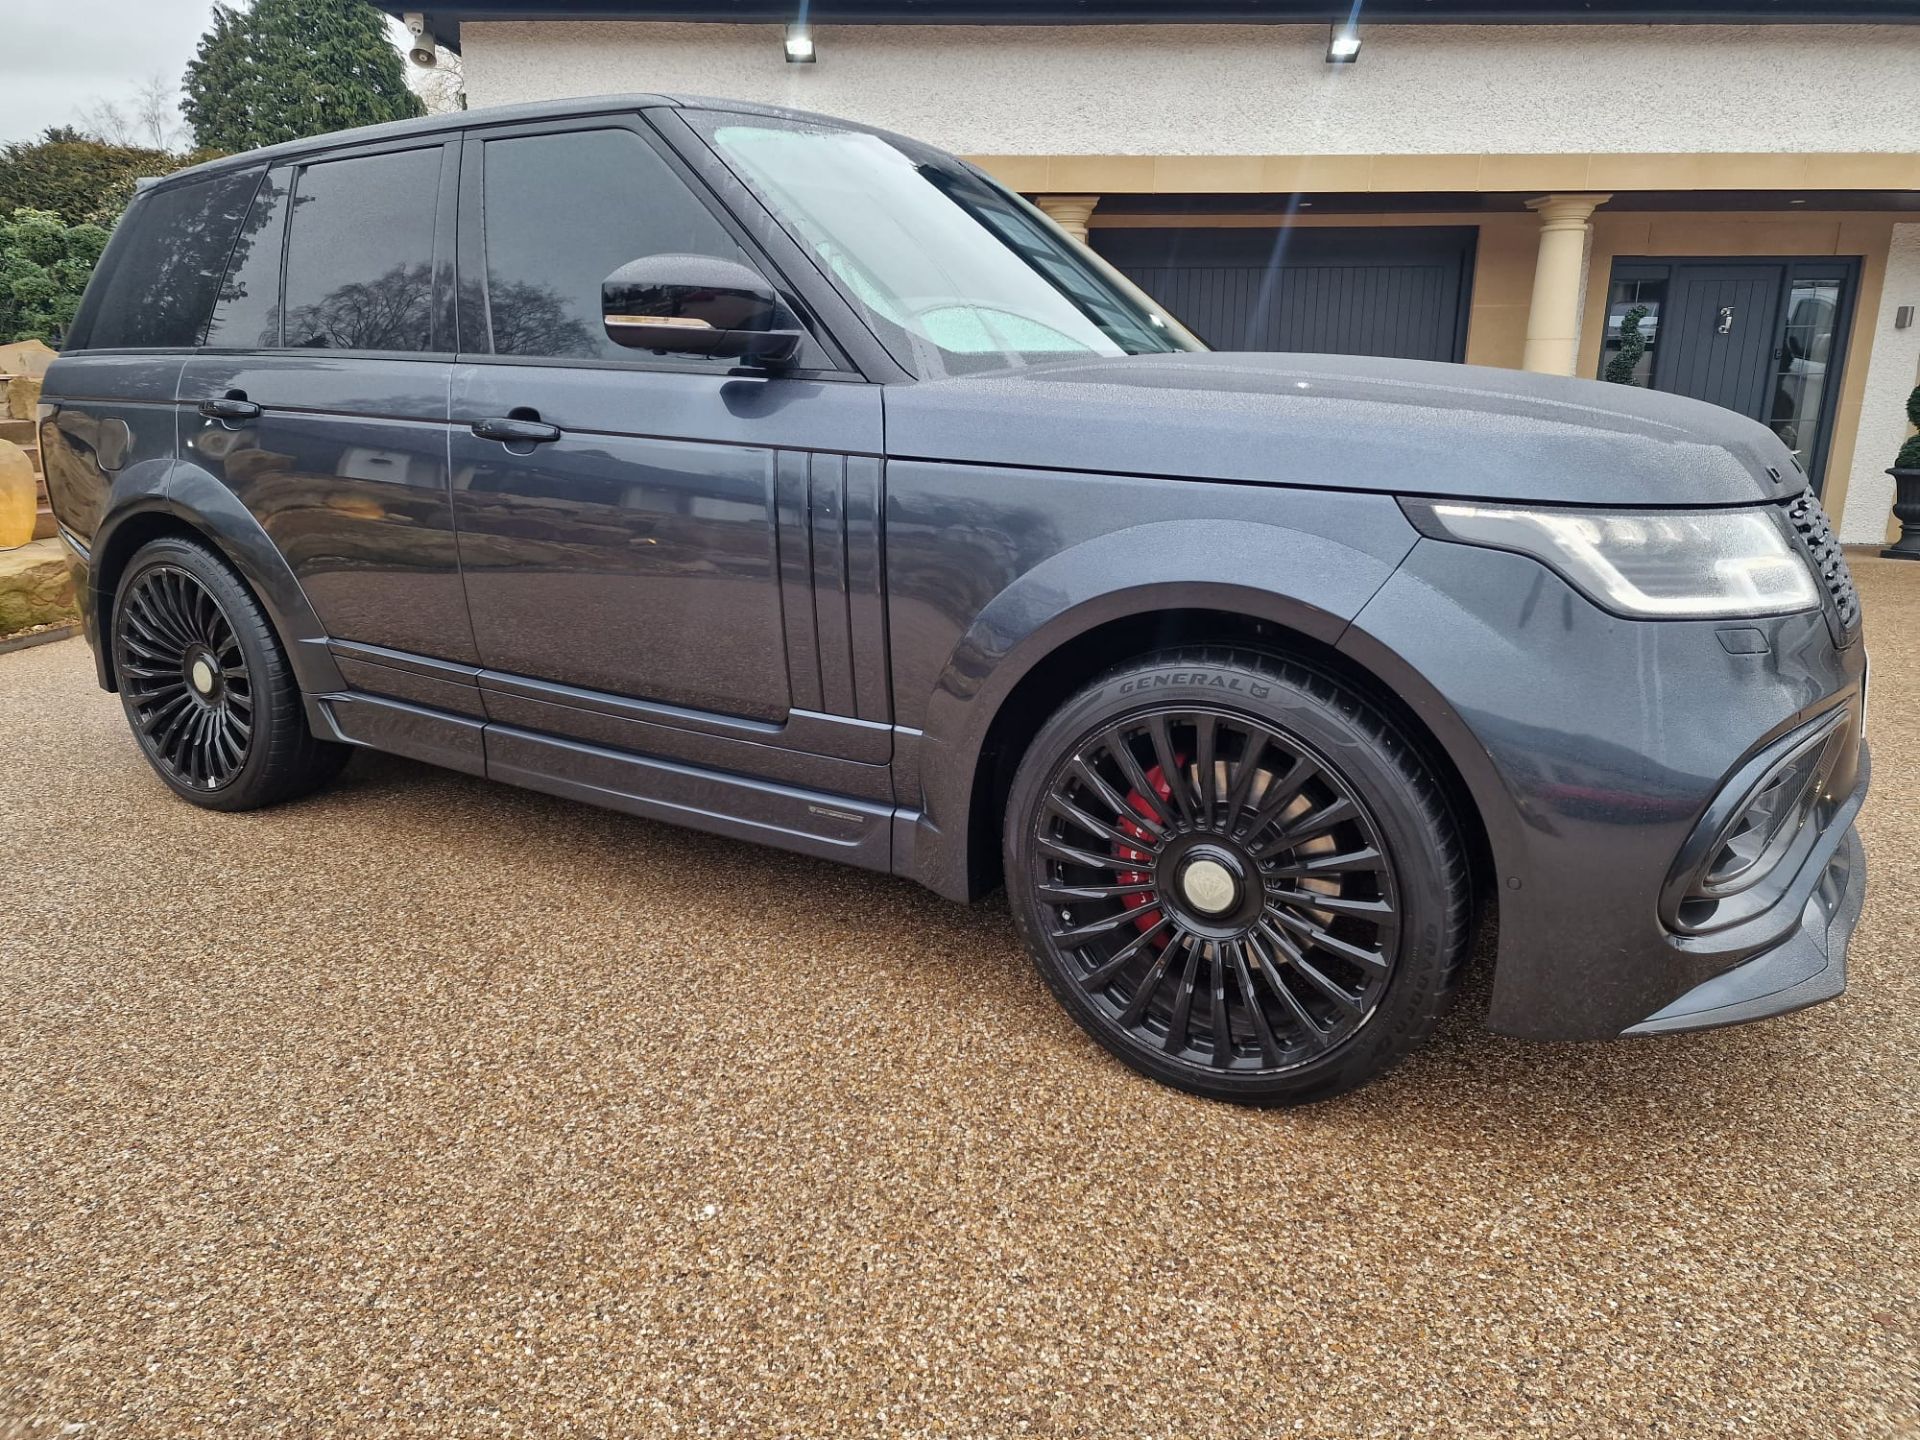 2018/68 RANGE ROVER SV AUTOBIOGRAPHY DYN V8 SC AUTO - £40K WORTH OF ONYX BODY KIT AND CONVERSION - Image 6 of 77